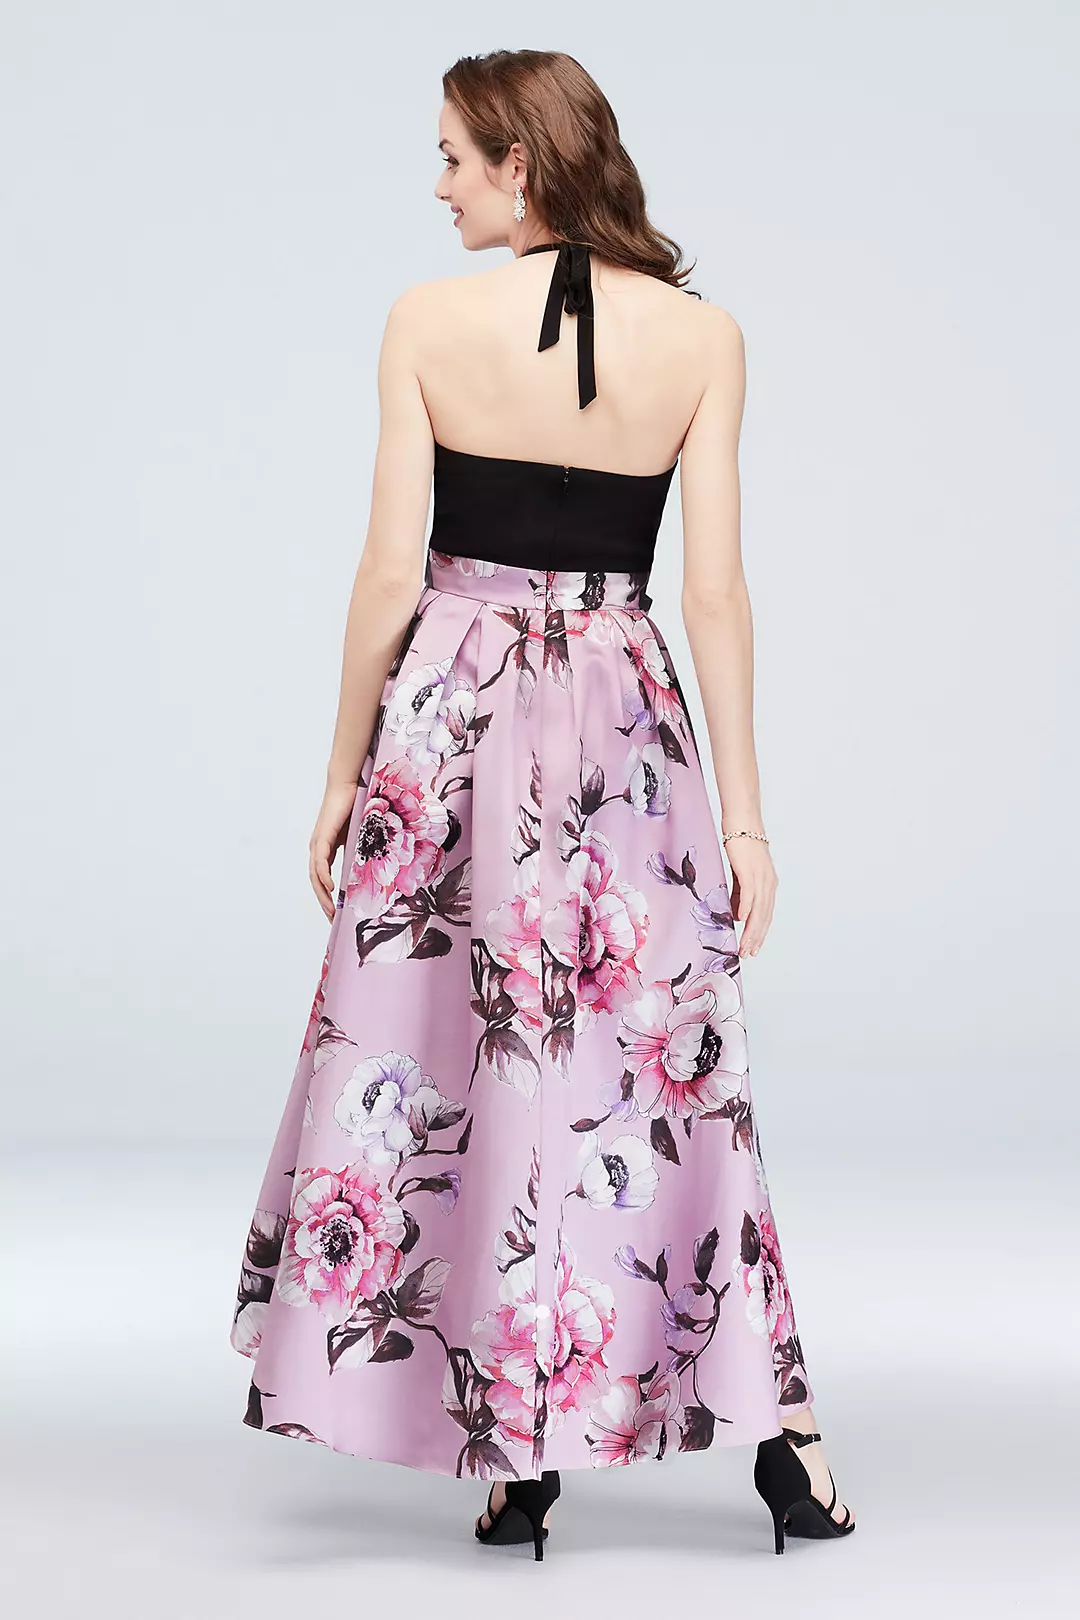 Halter Nigh-Neck Gown with Floral High-Low Hem Image 2